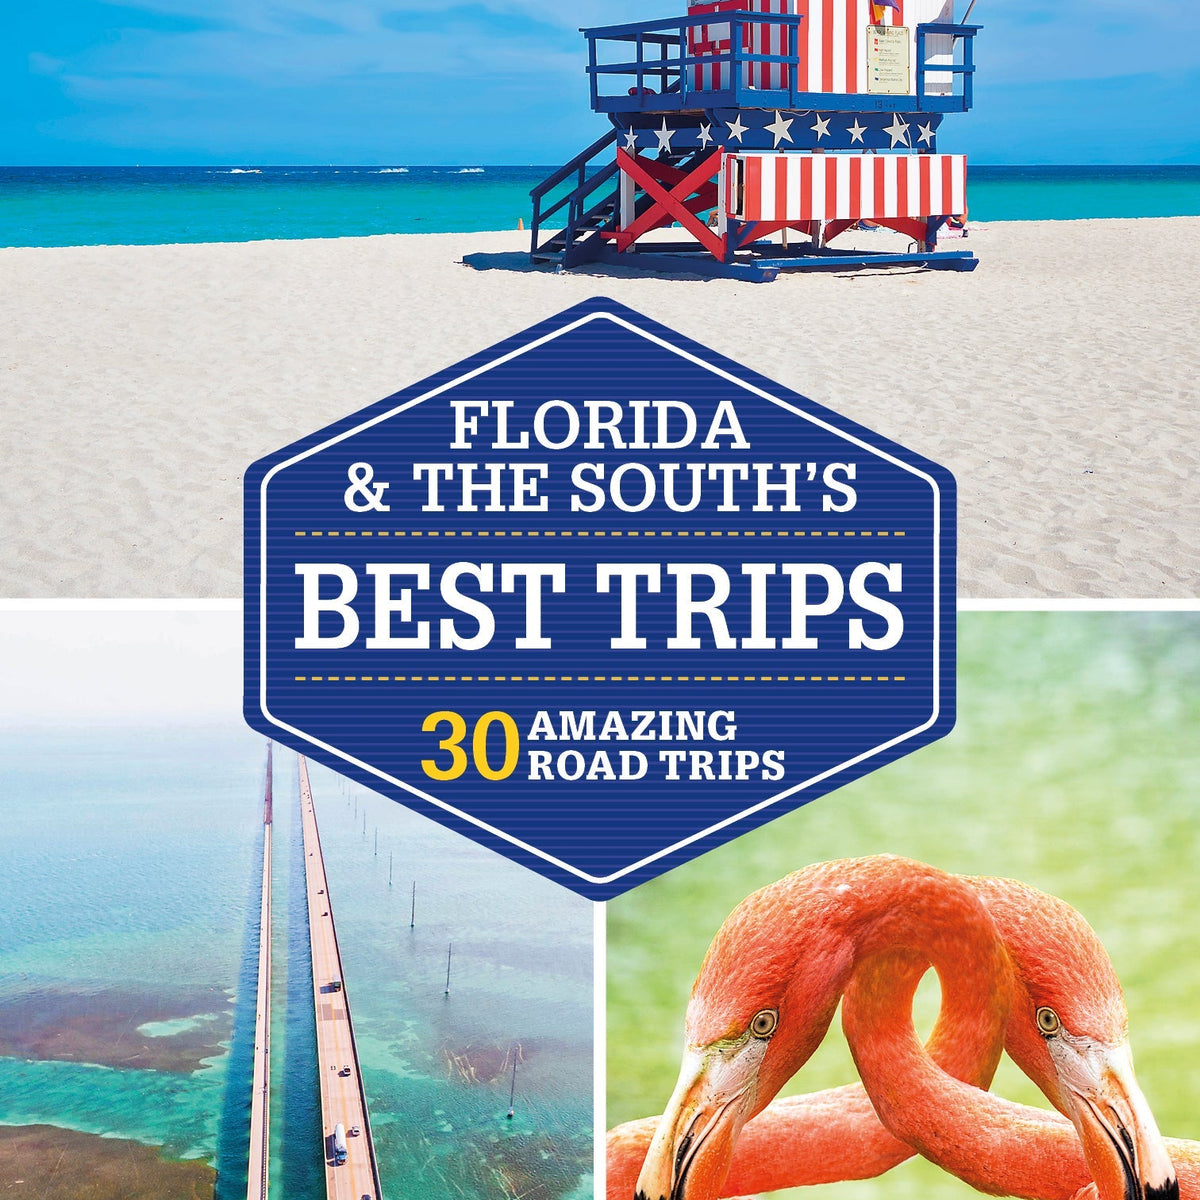 Travel　Florida　Ebook　Best　the　South's　and　Trips　Book